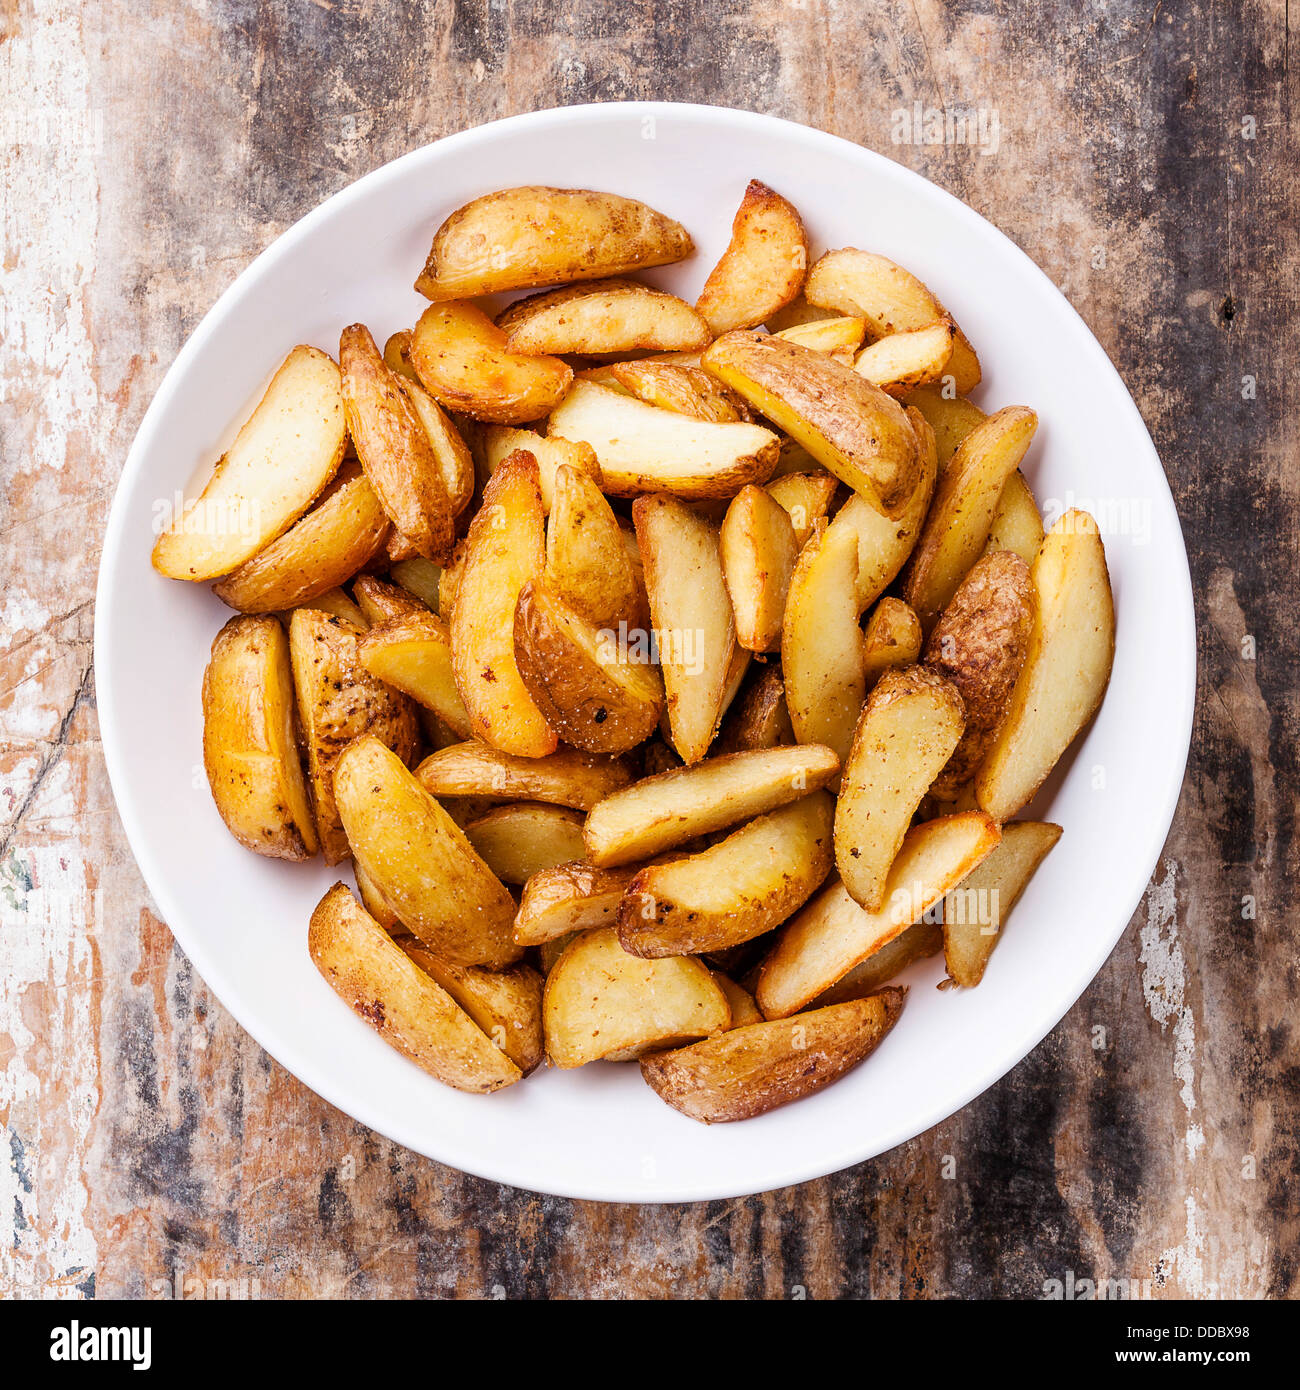 Fried potato 'country-style' on plate Stock Photo